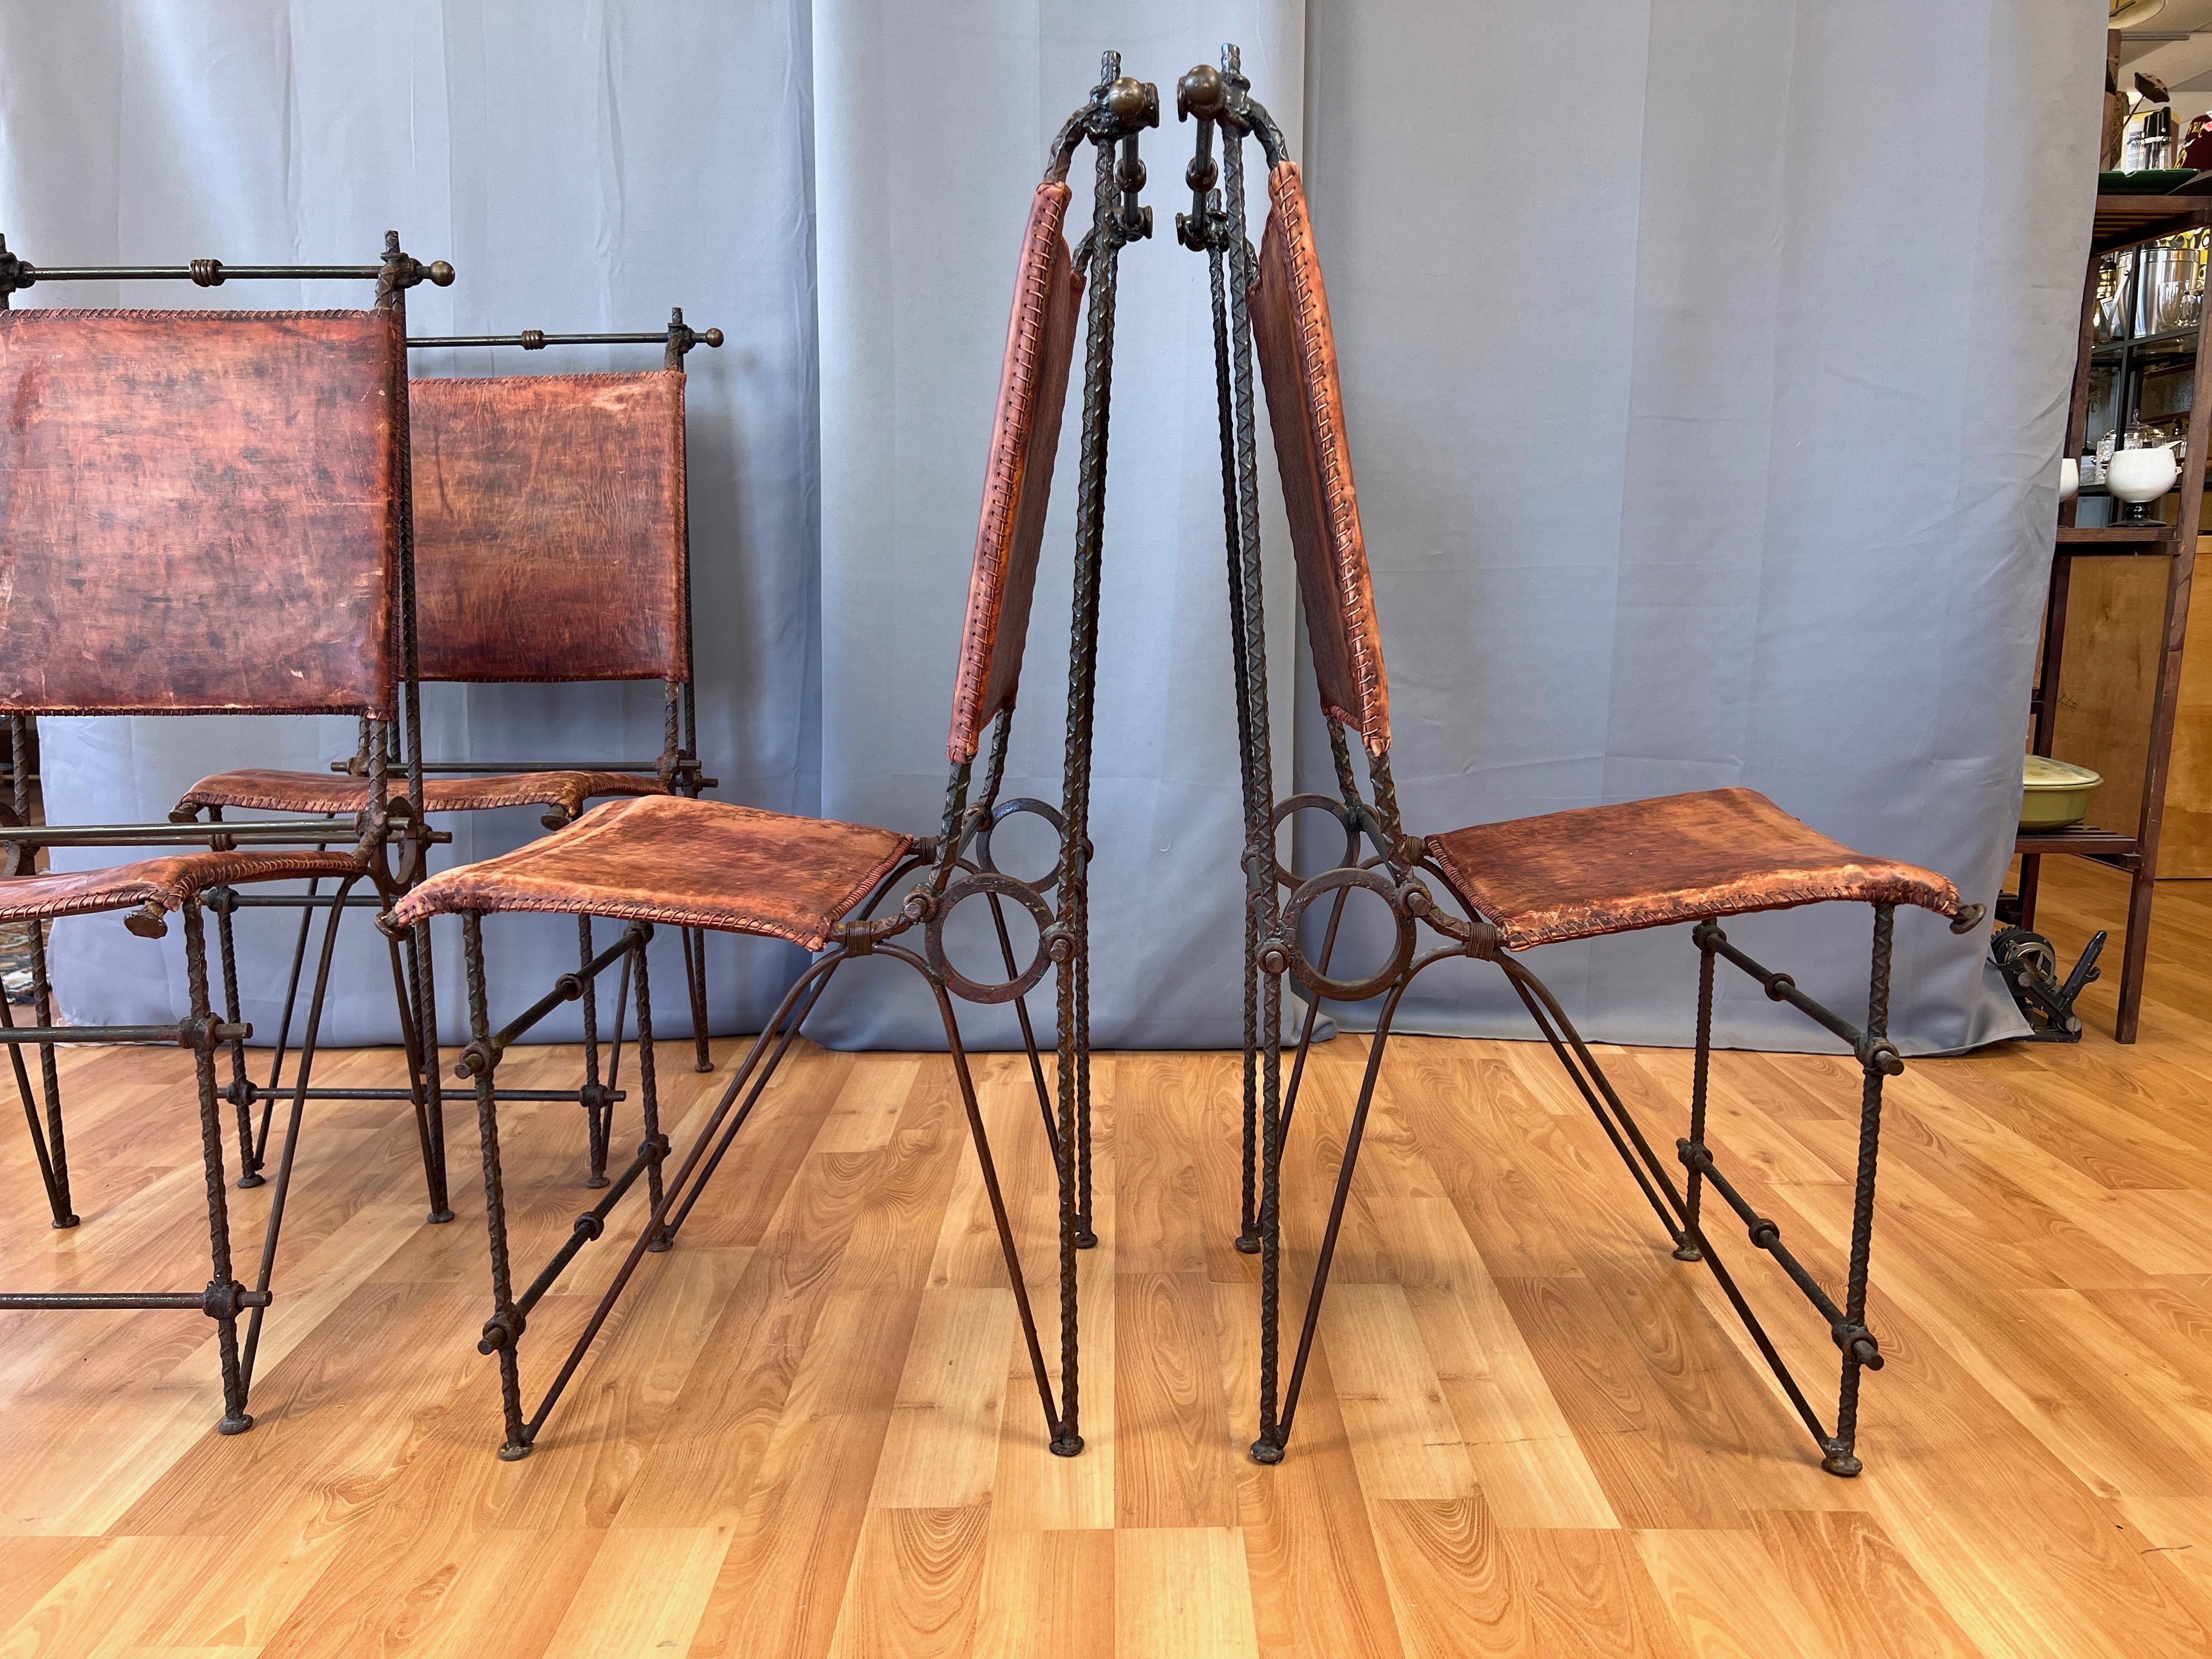 Set of 4 Ilana Goor-Attributed Brutalist Metal and Leather Dining Chairs, 1980 For Sale 3